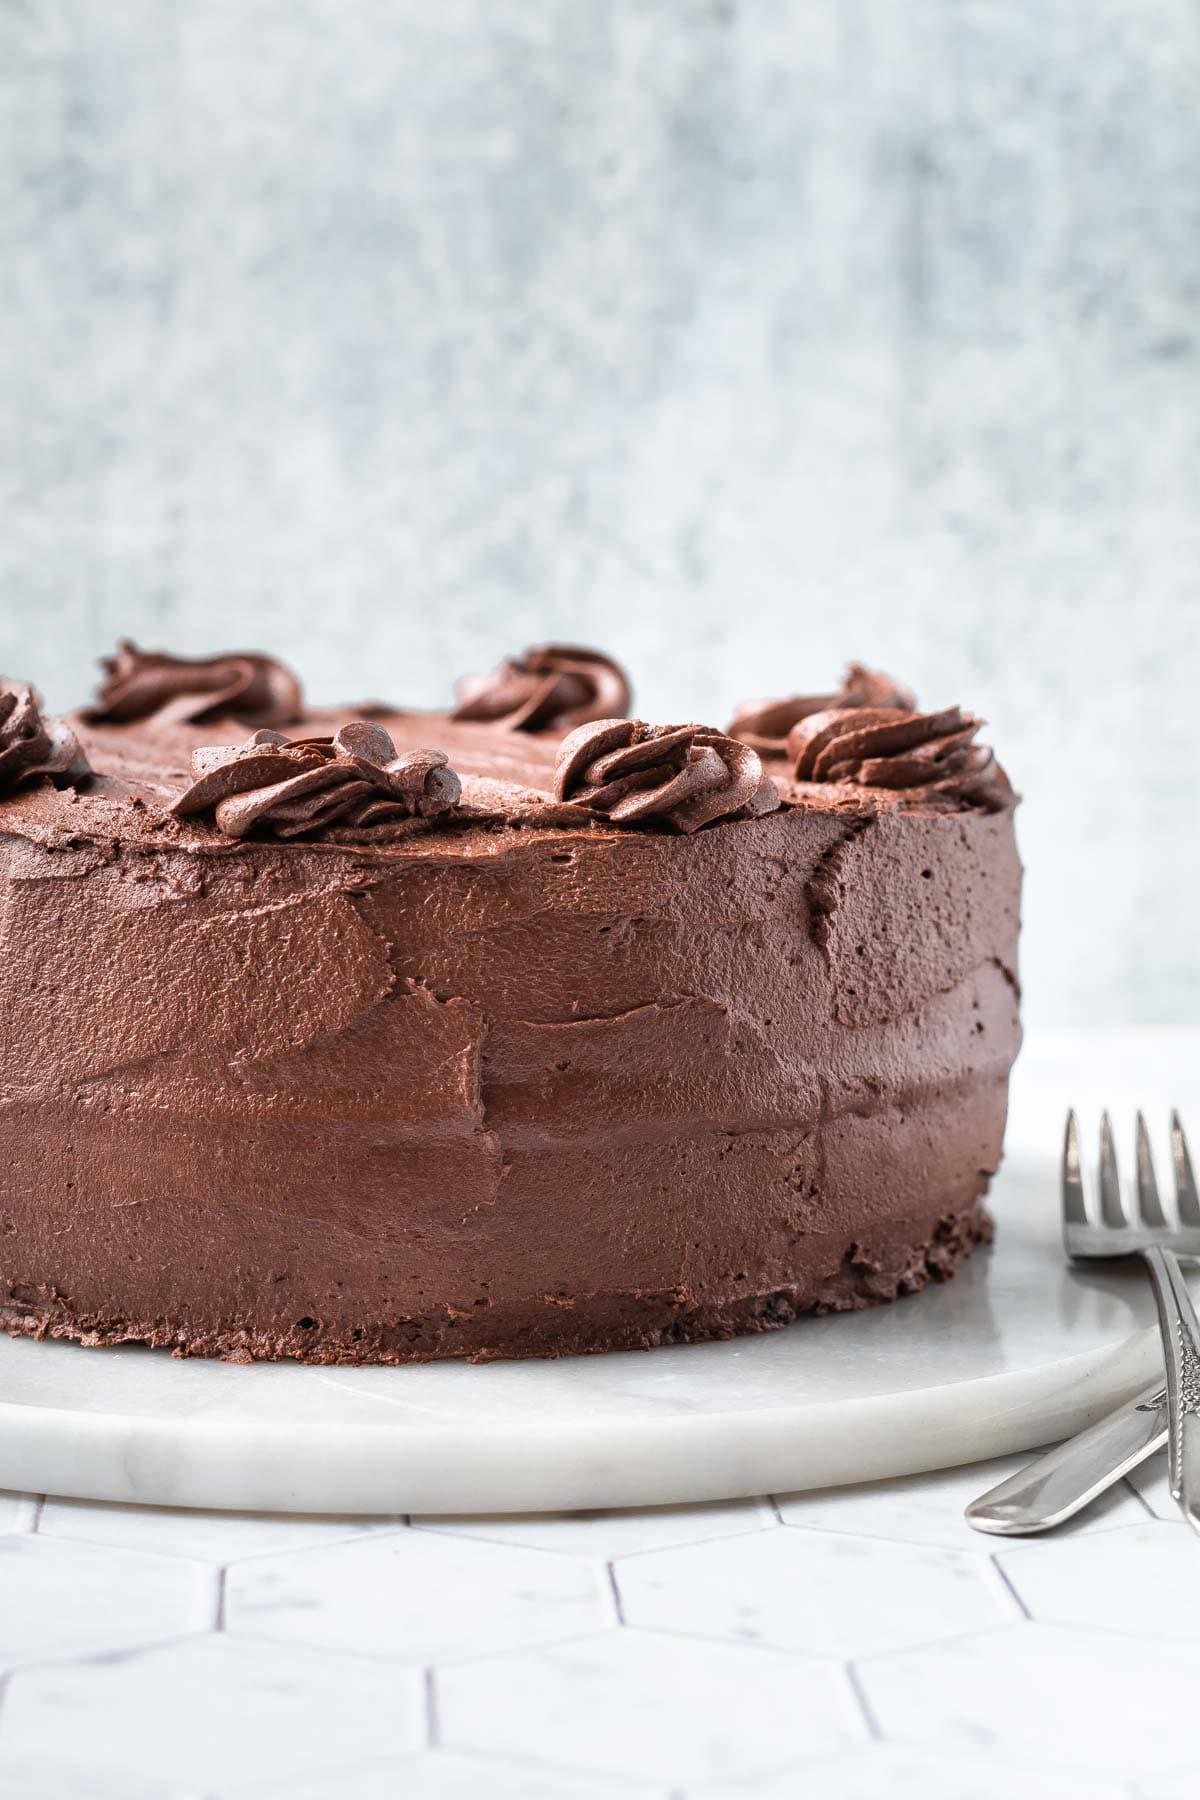 side view of dark chocolate cake without slices visible creamy frosting